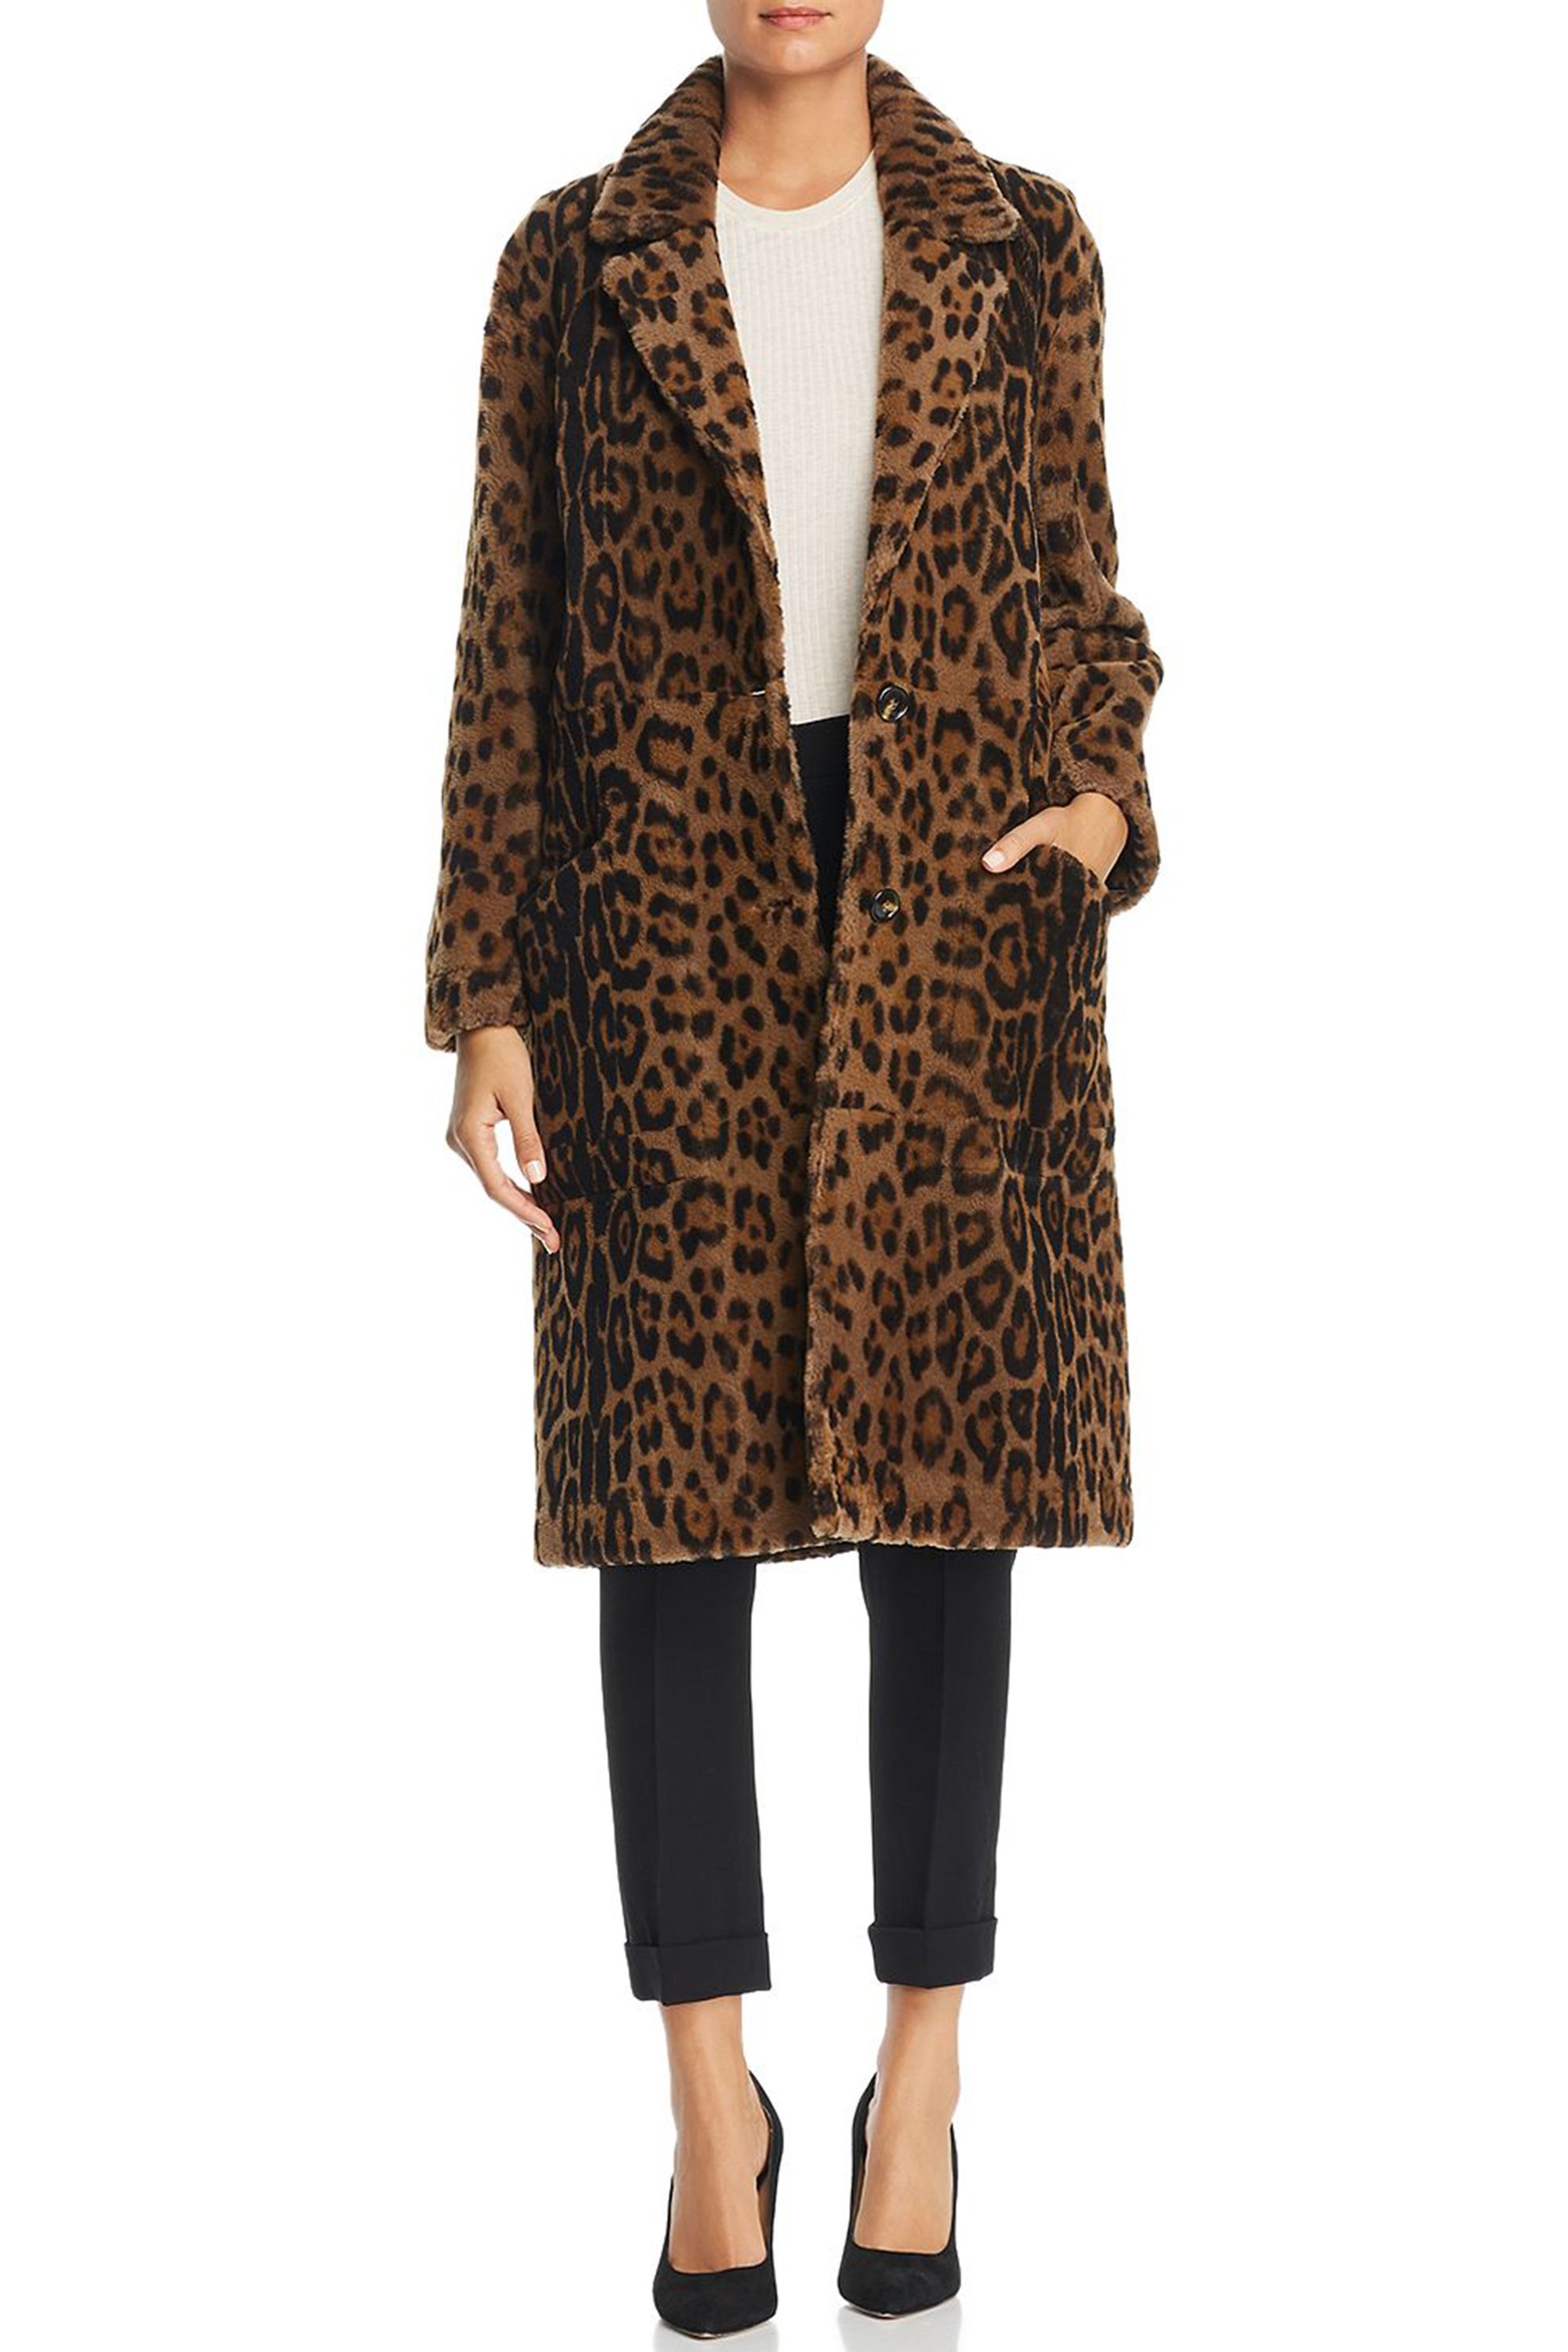 Clothing, Fur, Outerwear, Coat, Brown, Overcoat, Fur clothing, Sleeve, Collar, Trench coat, 